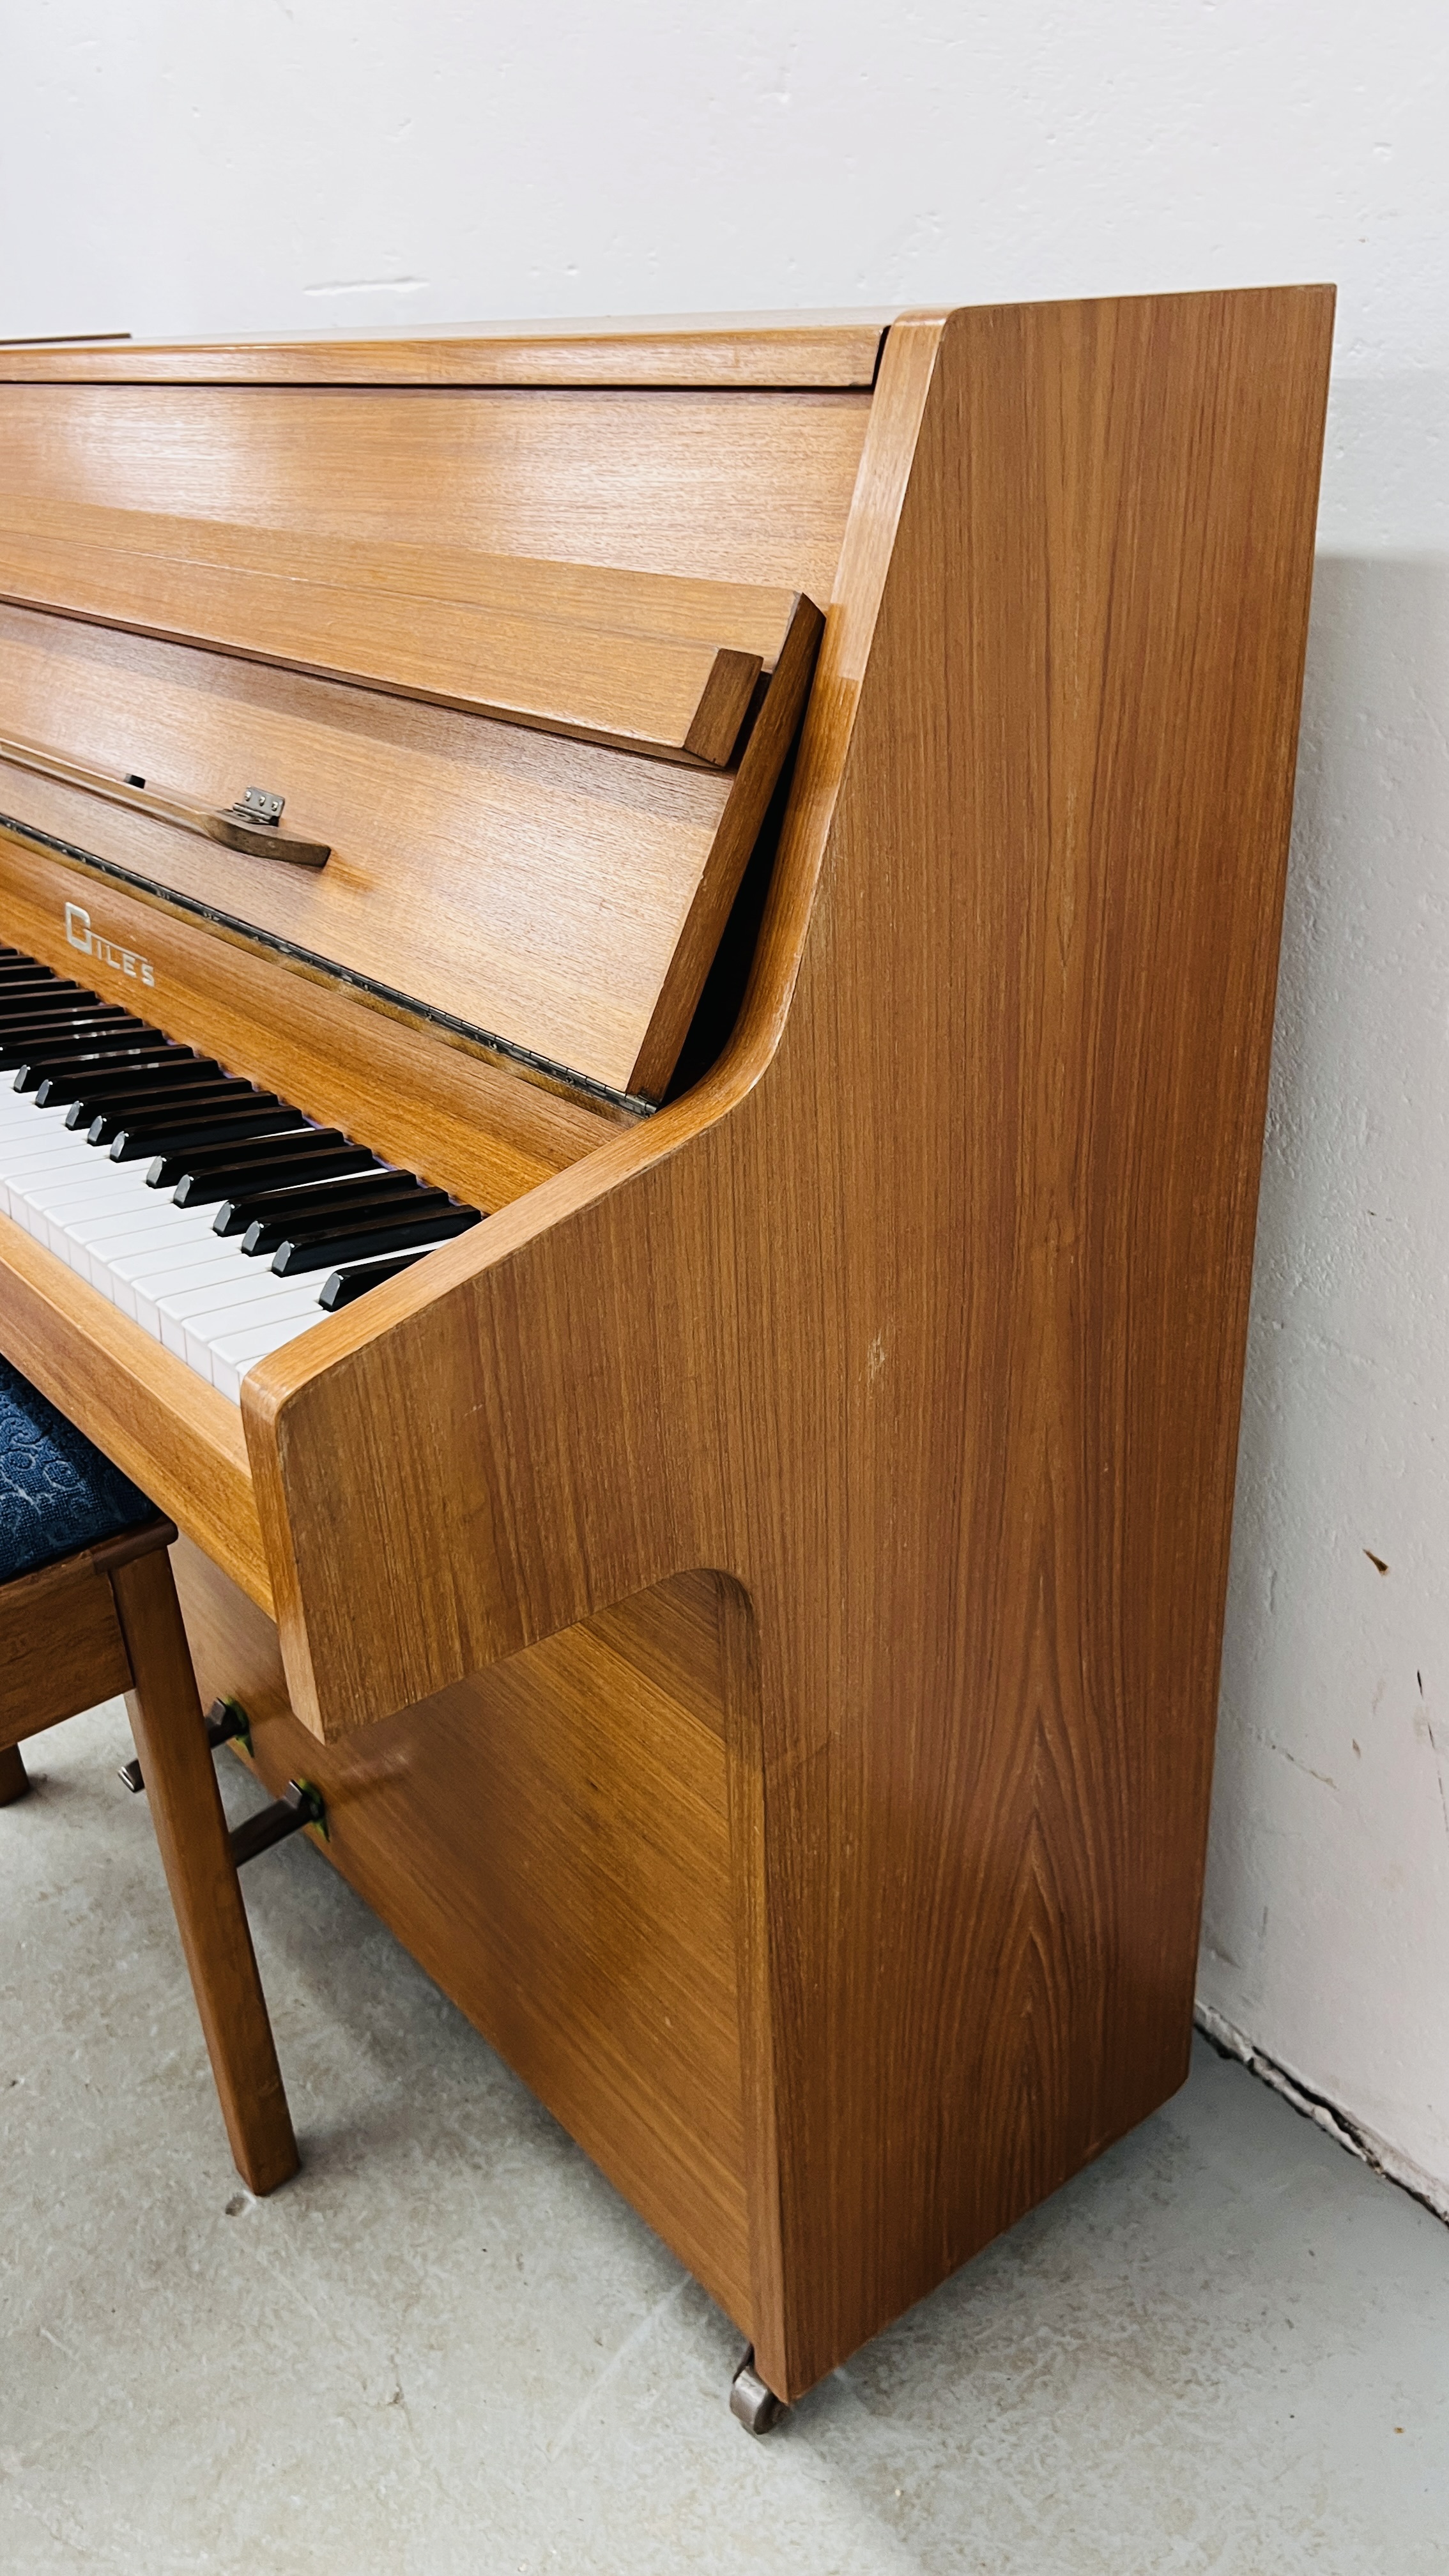 A GILES MODERN OVERSTRUNG UPRIGHT PIANO COMPLETE WITH MUSIC STOOL - Image 8 of 14